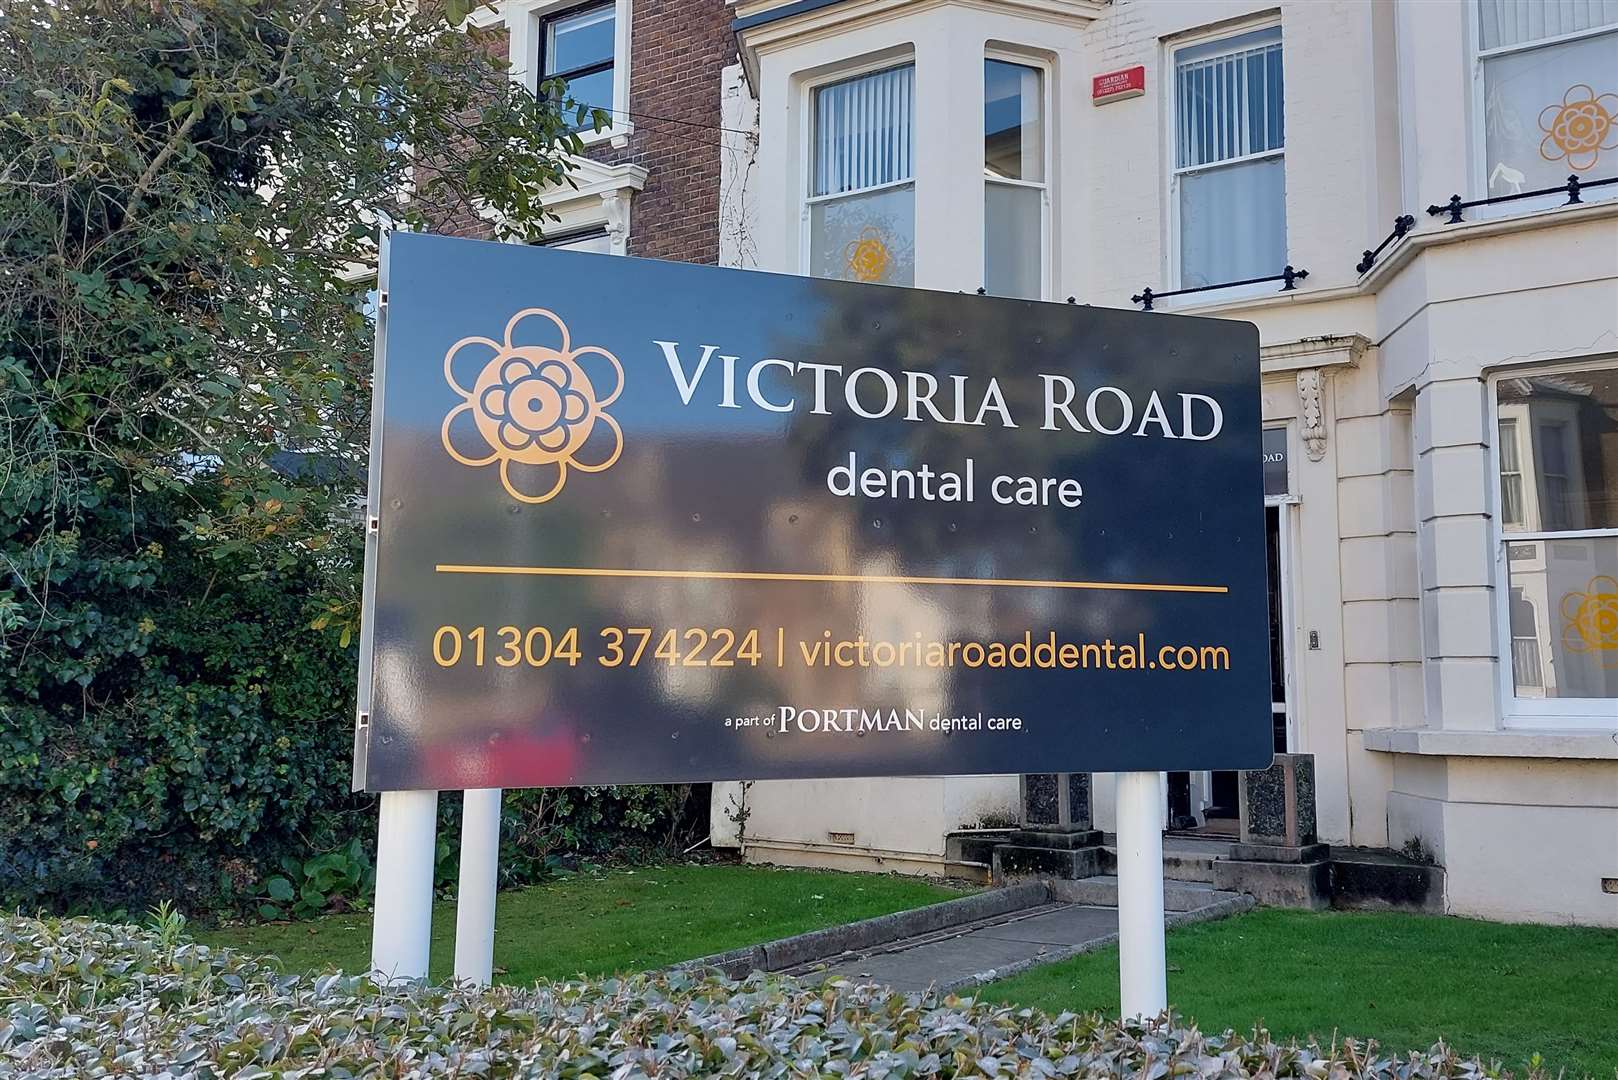 The v-shaped sign outside Victoria Road Dental Care has sparked complaints from residents